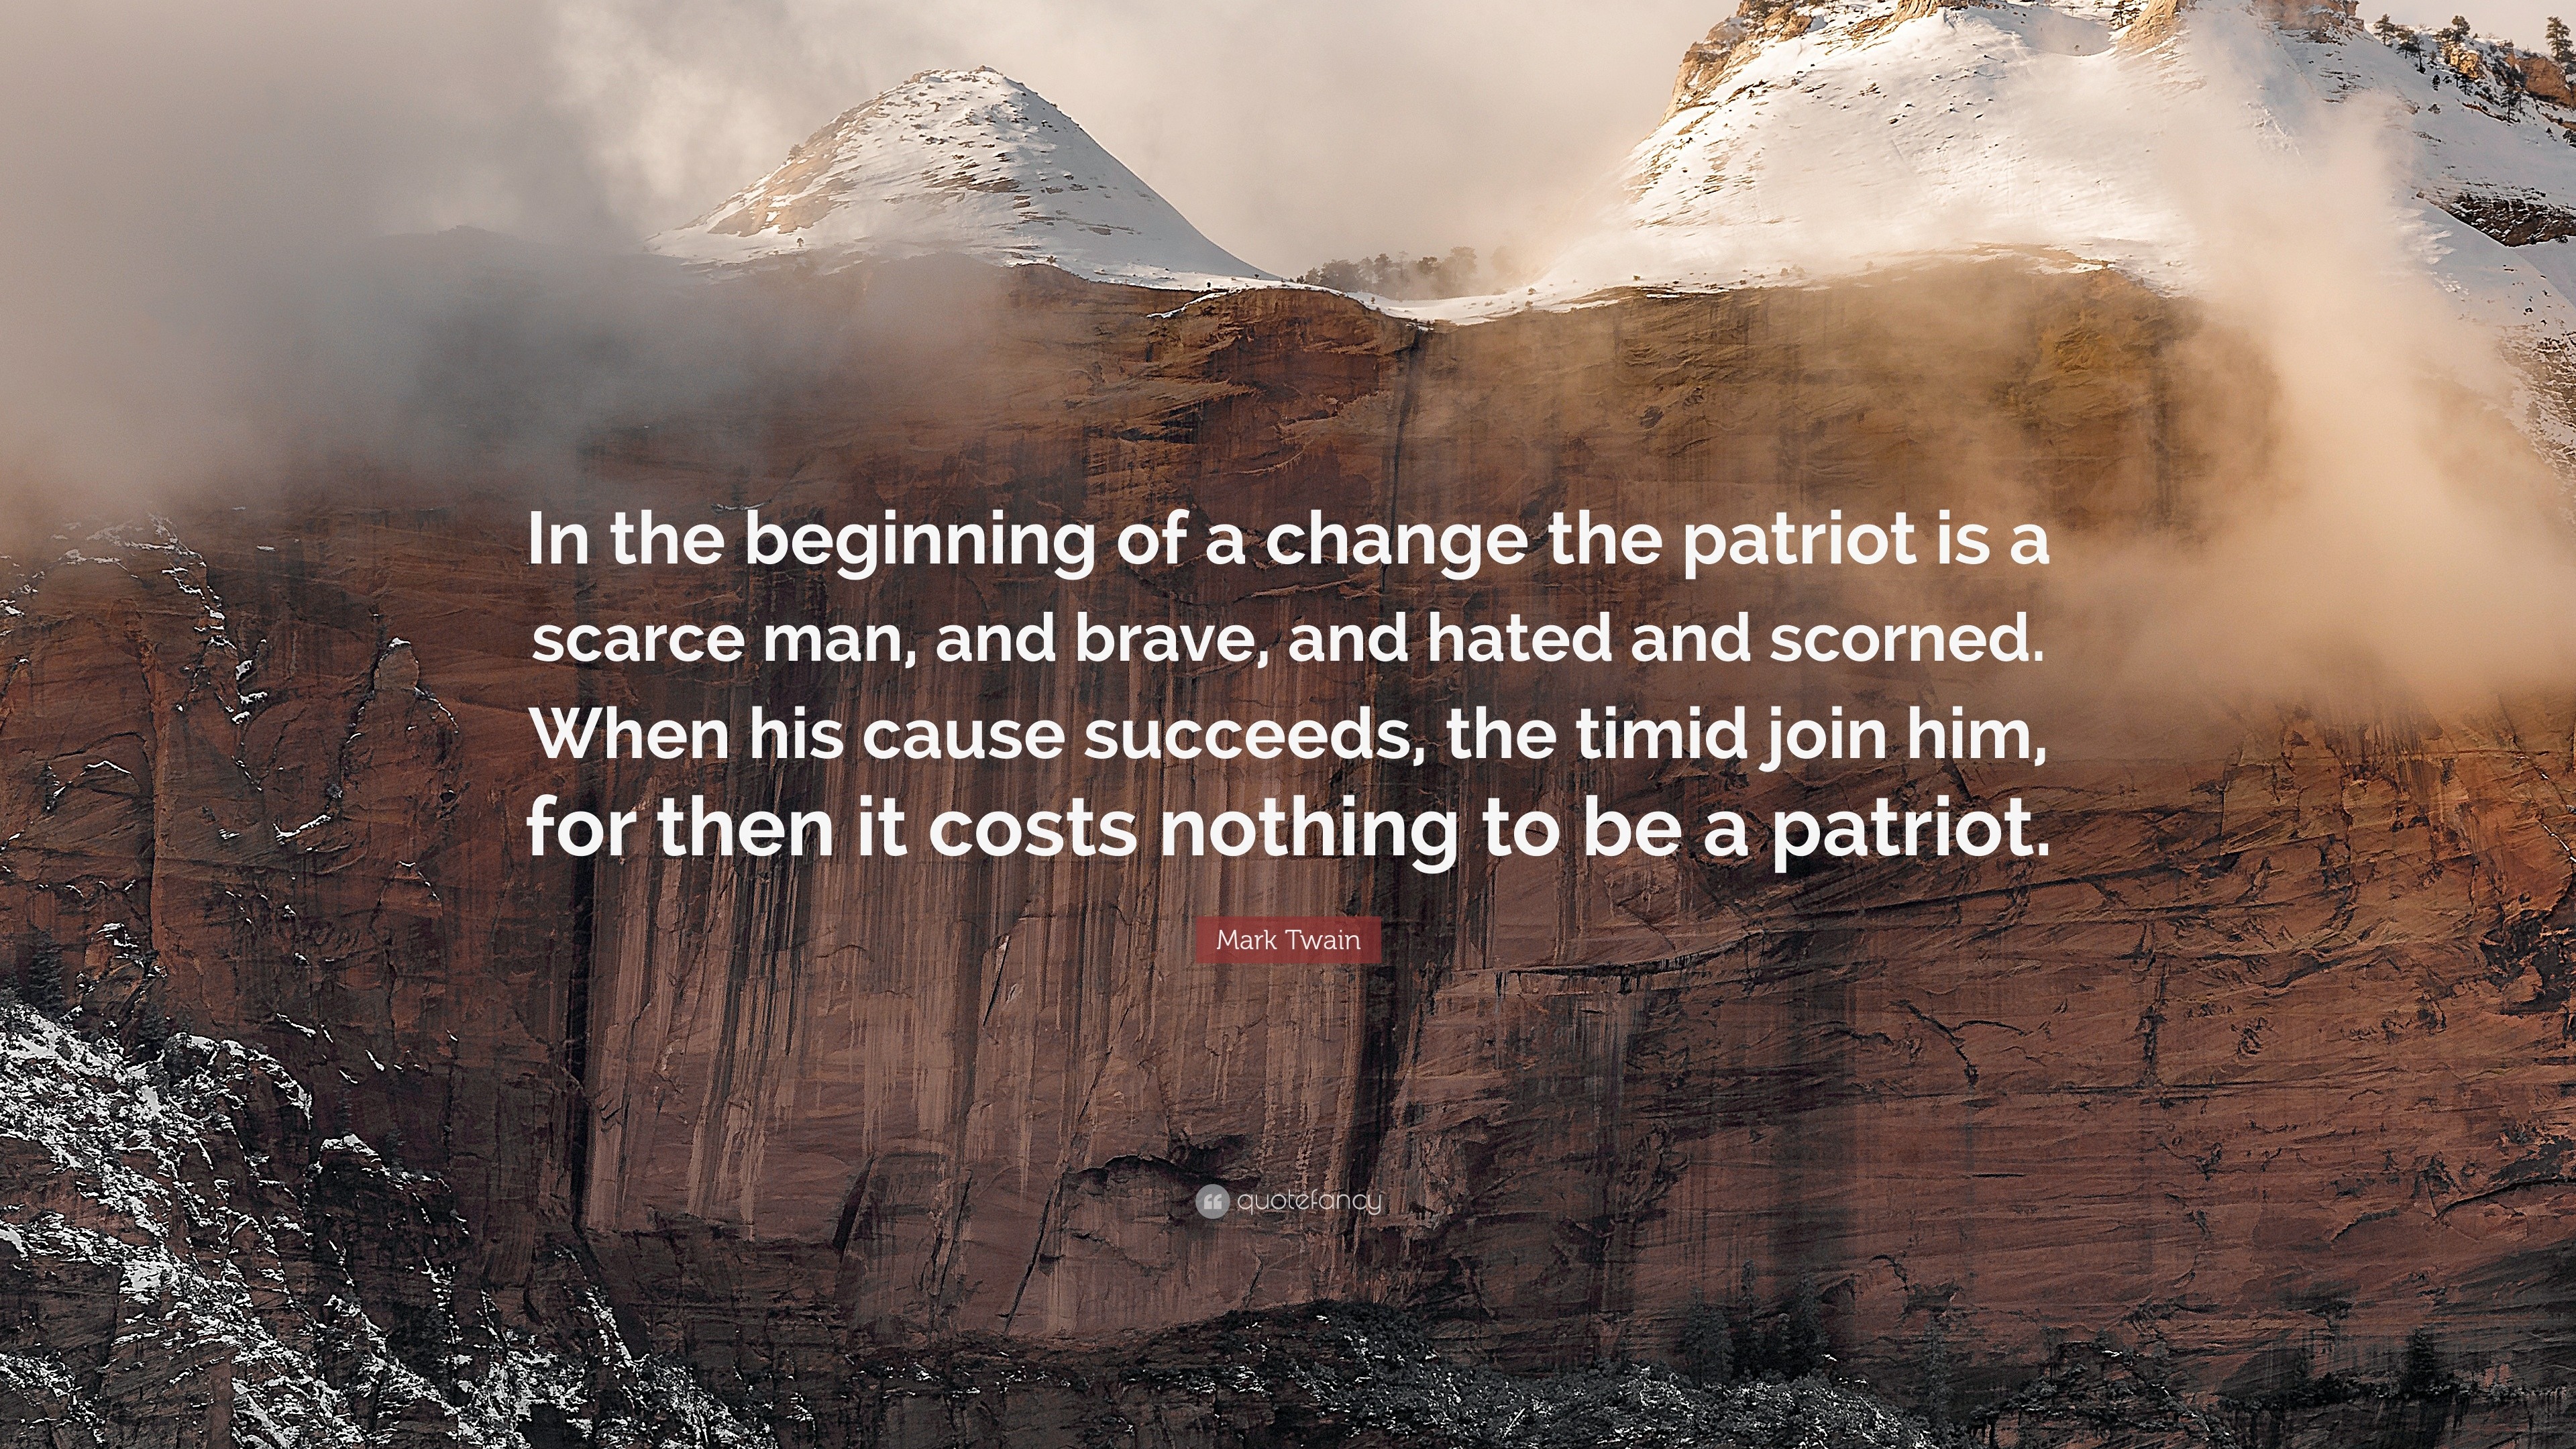 Mark Twain Quote: “In the beginning of a change the patriot is a scarce